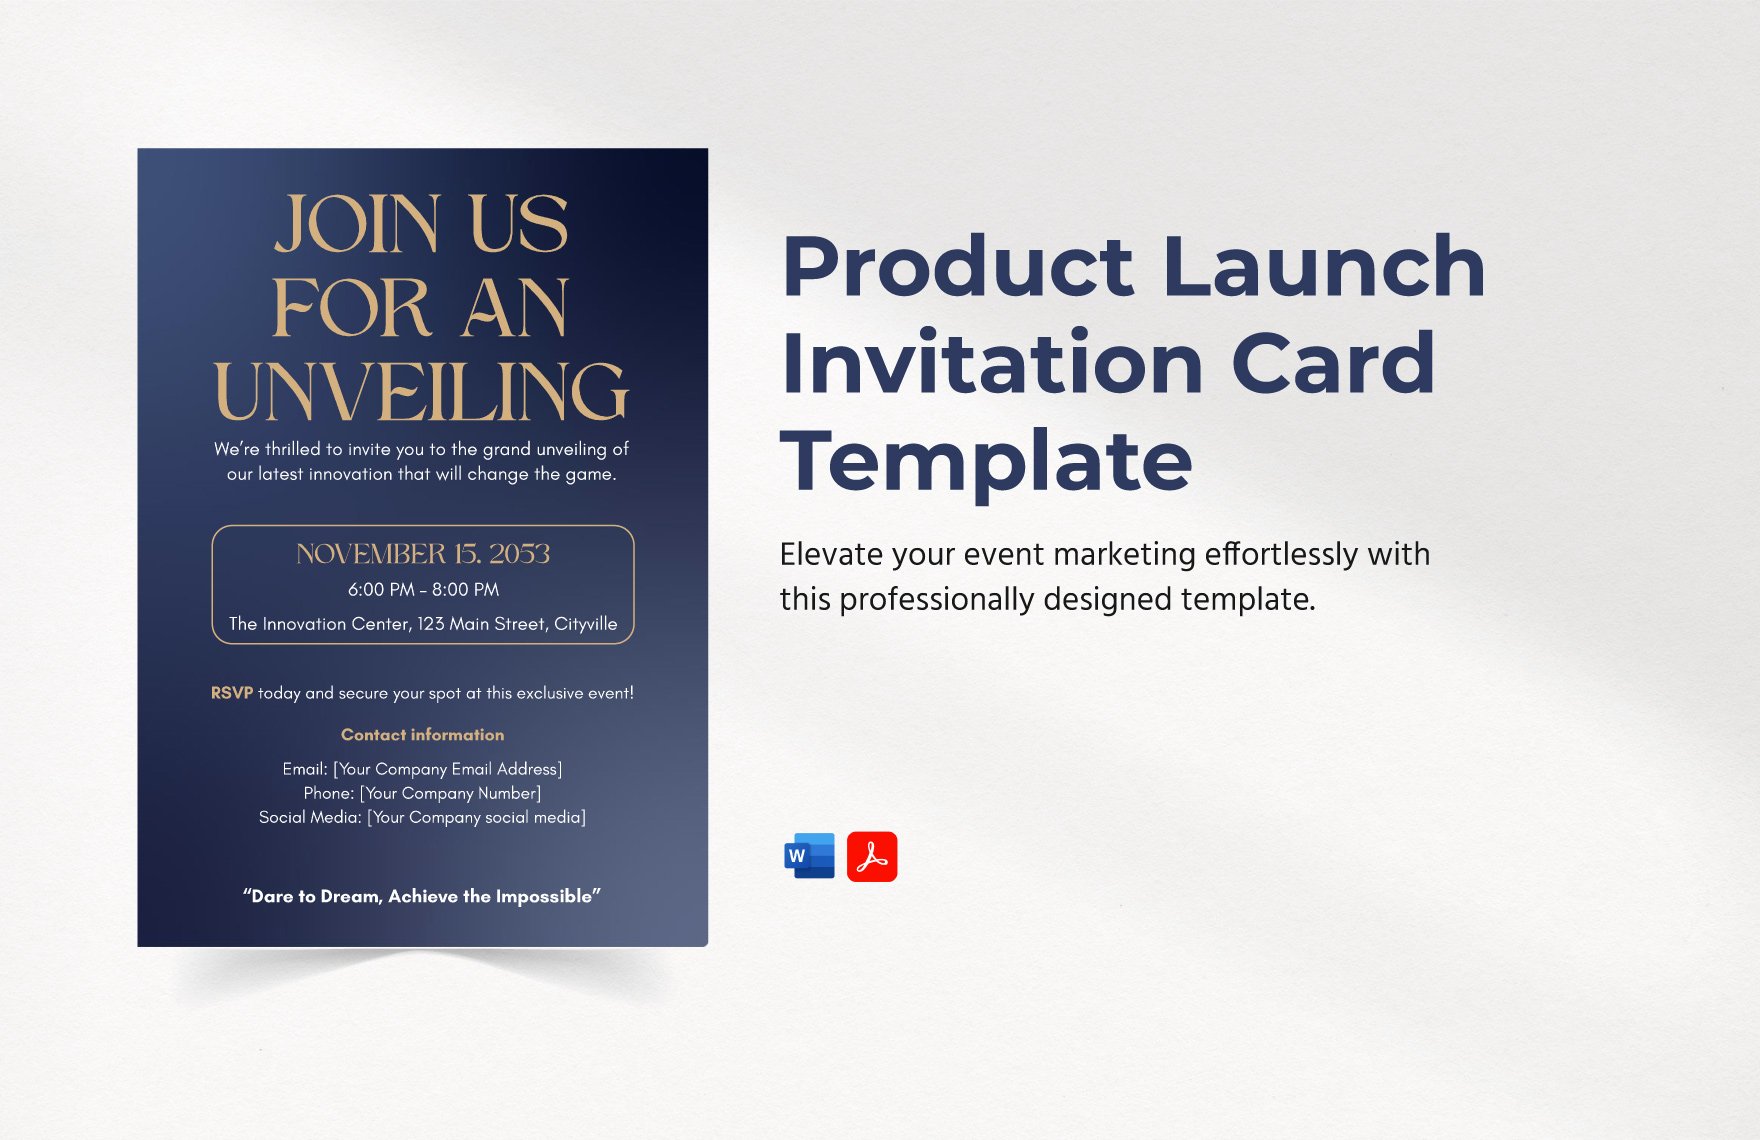 Product Launch Invitation Card Template